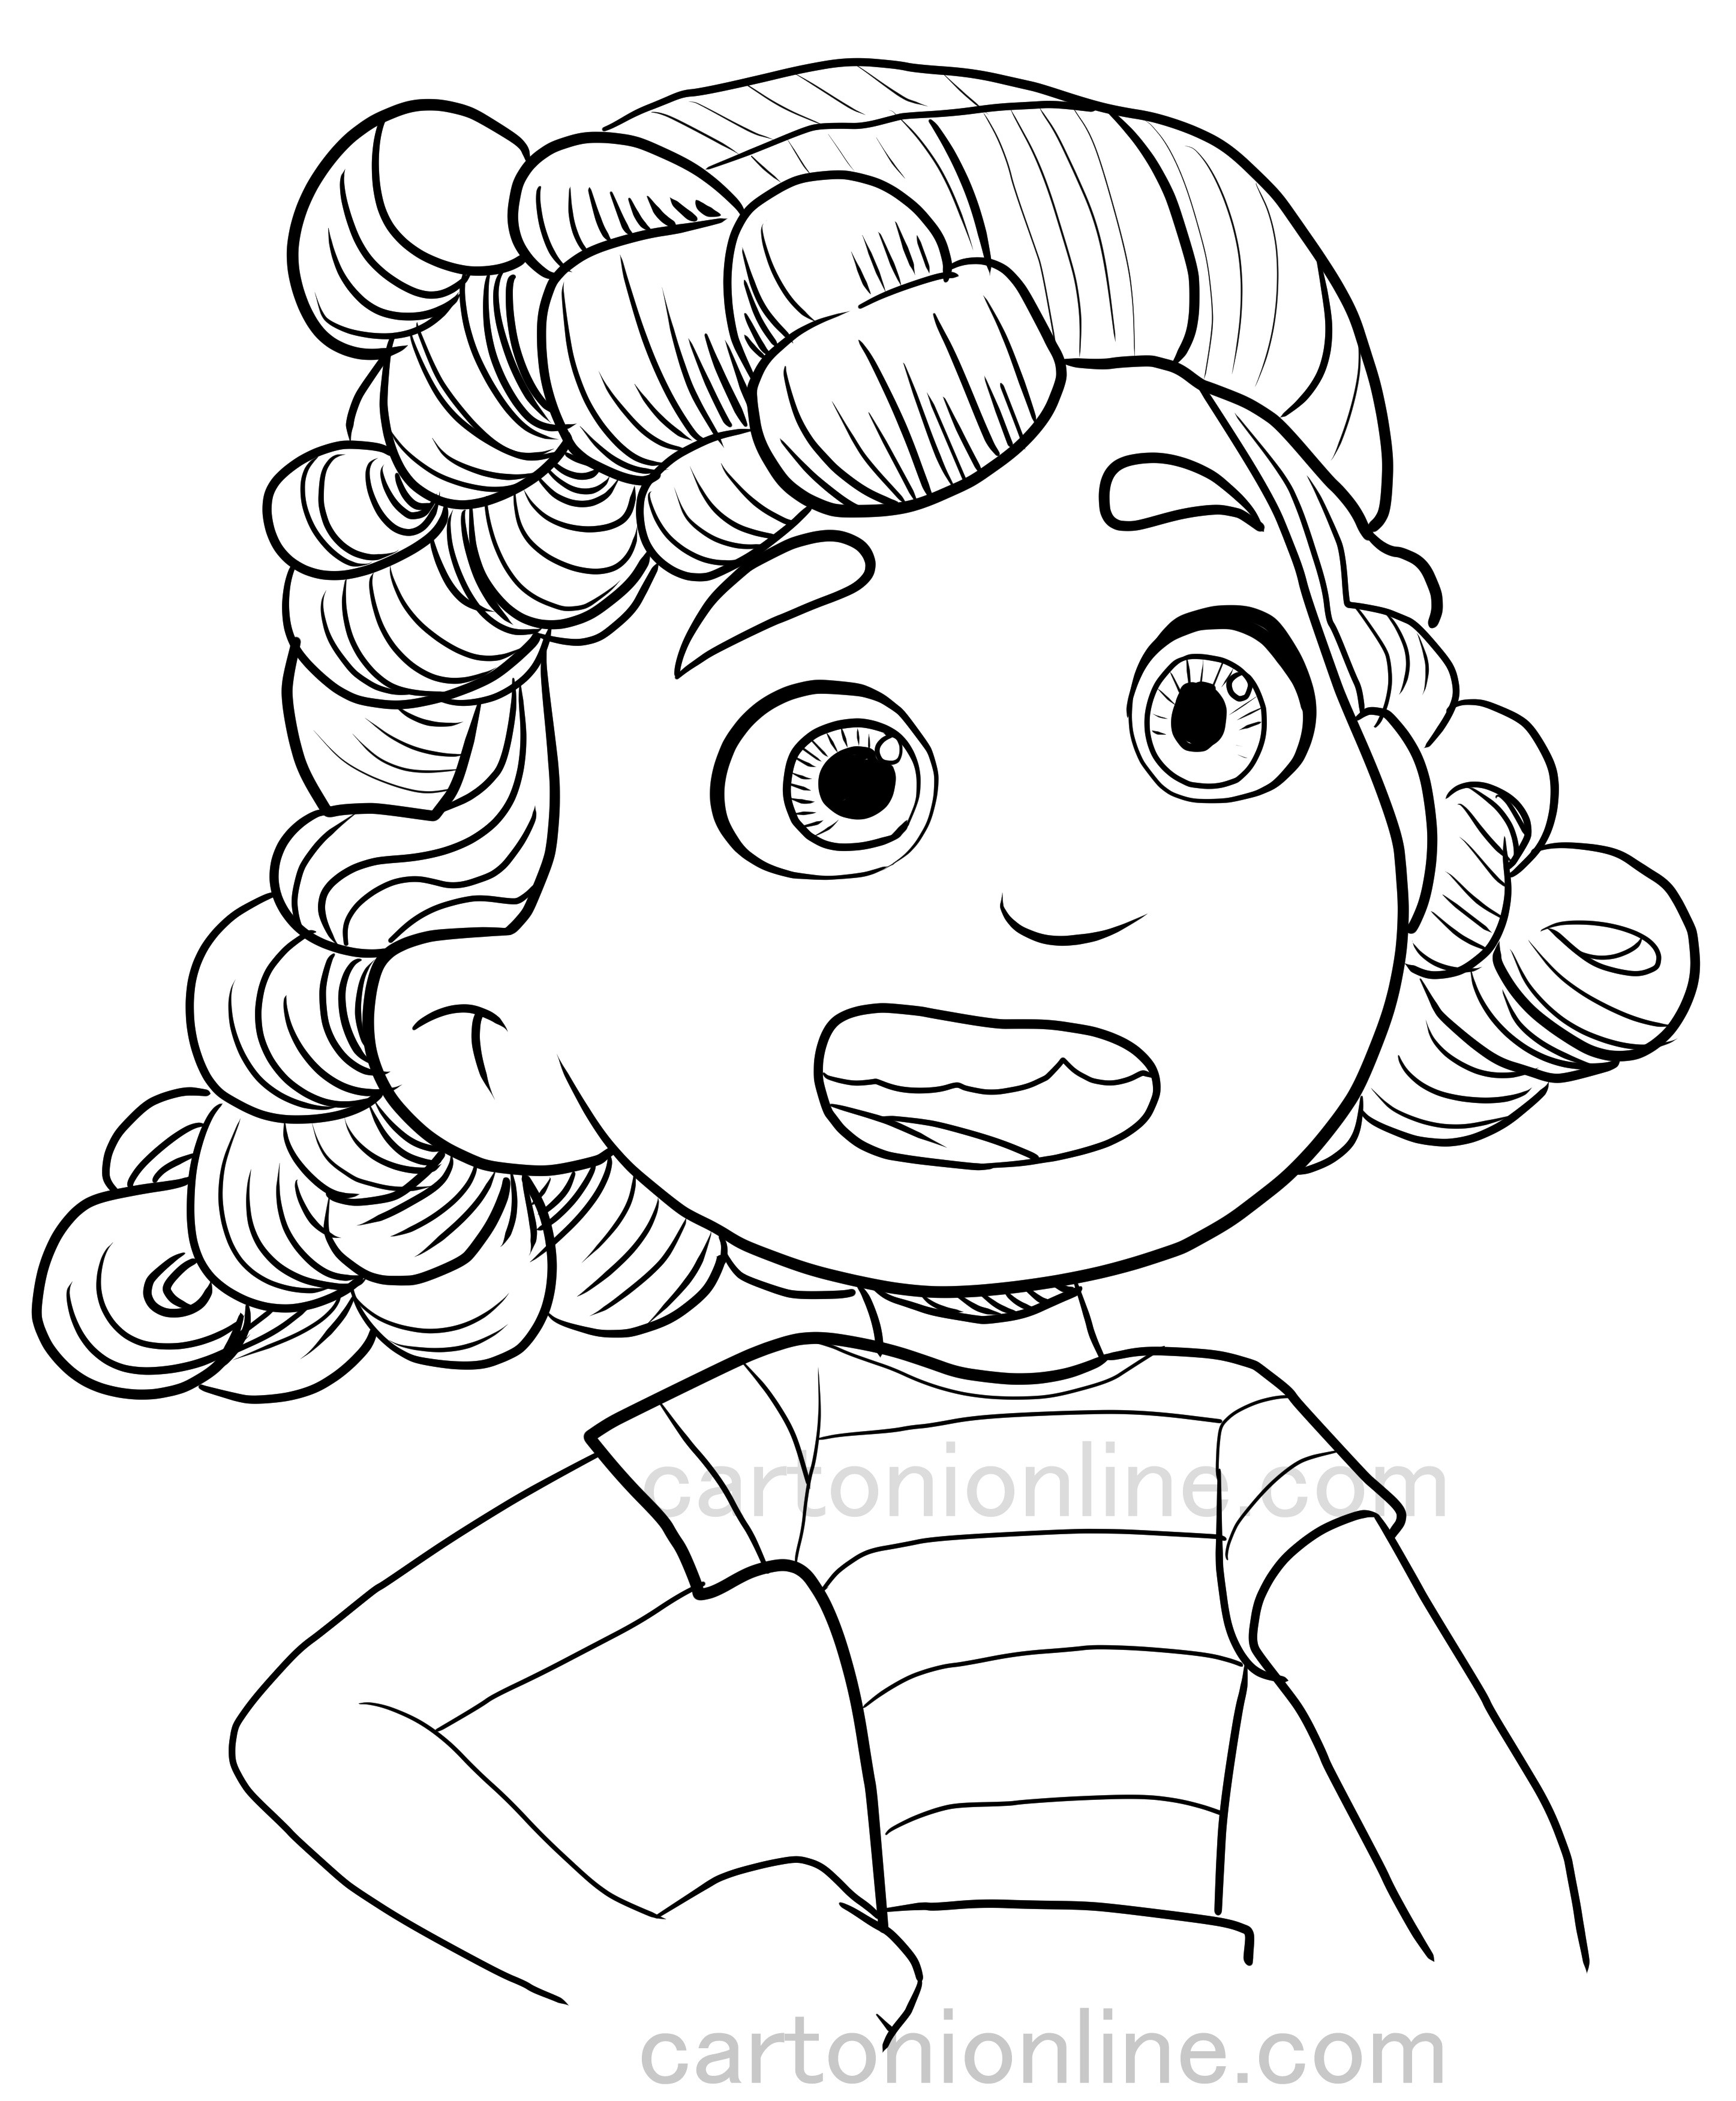 Giulia from Luca the Disney Pixar movie coloring page to print and coloring